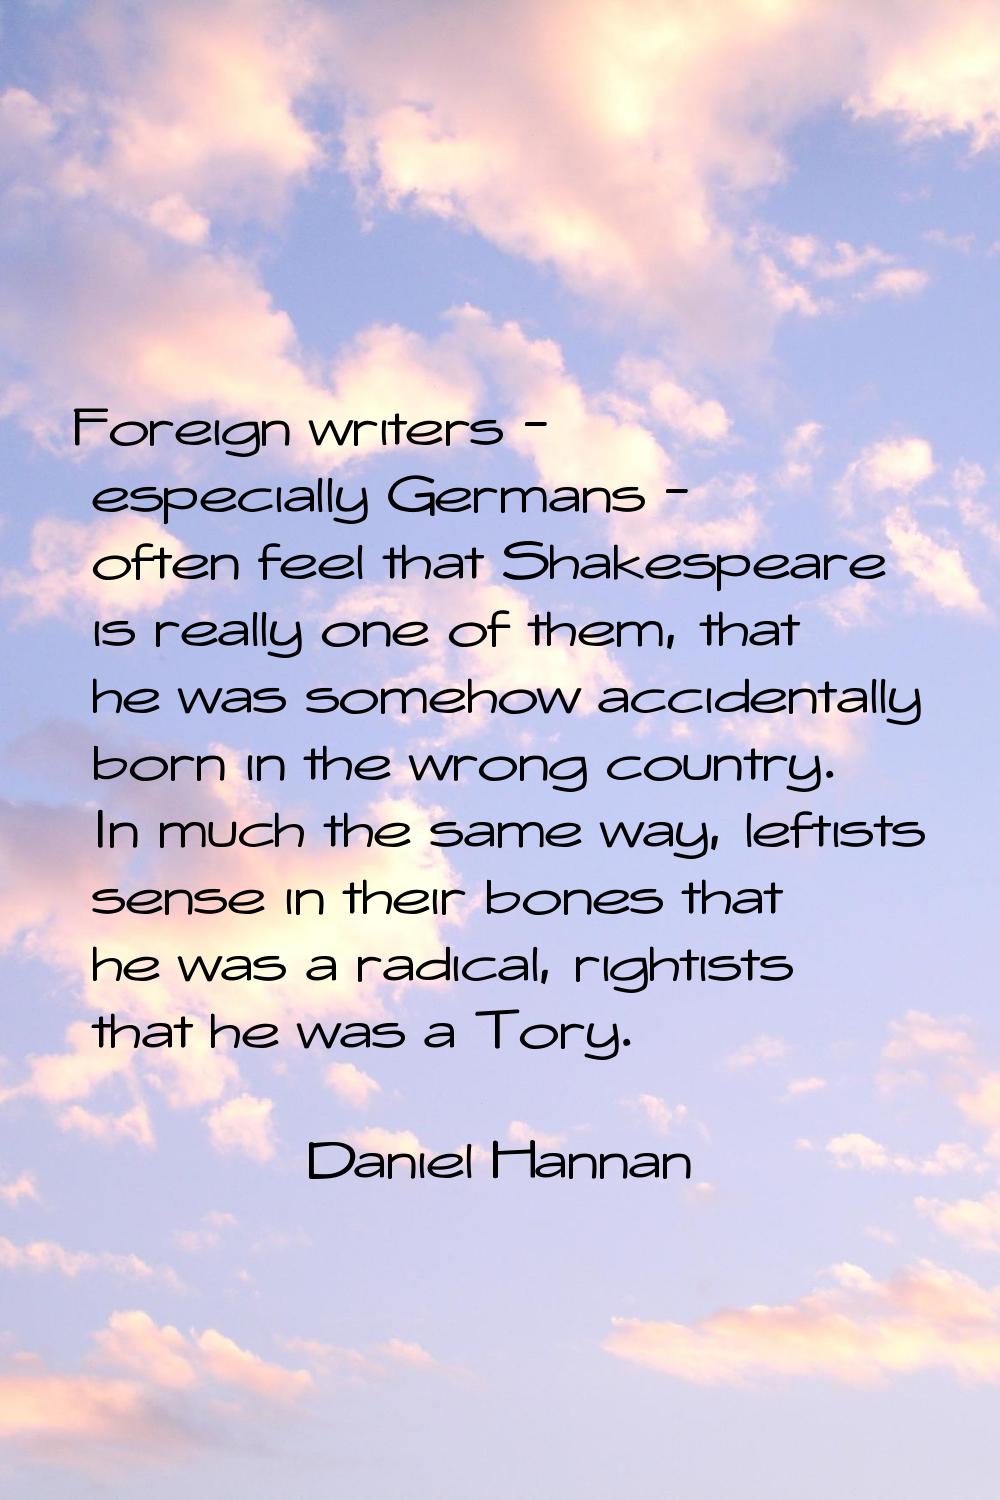 Foreign writers - especially Germans - often feel that Shakespeare is really one of them, that he w